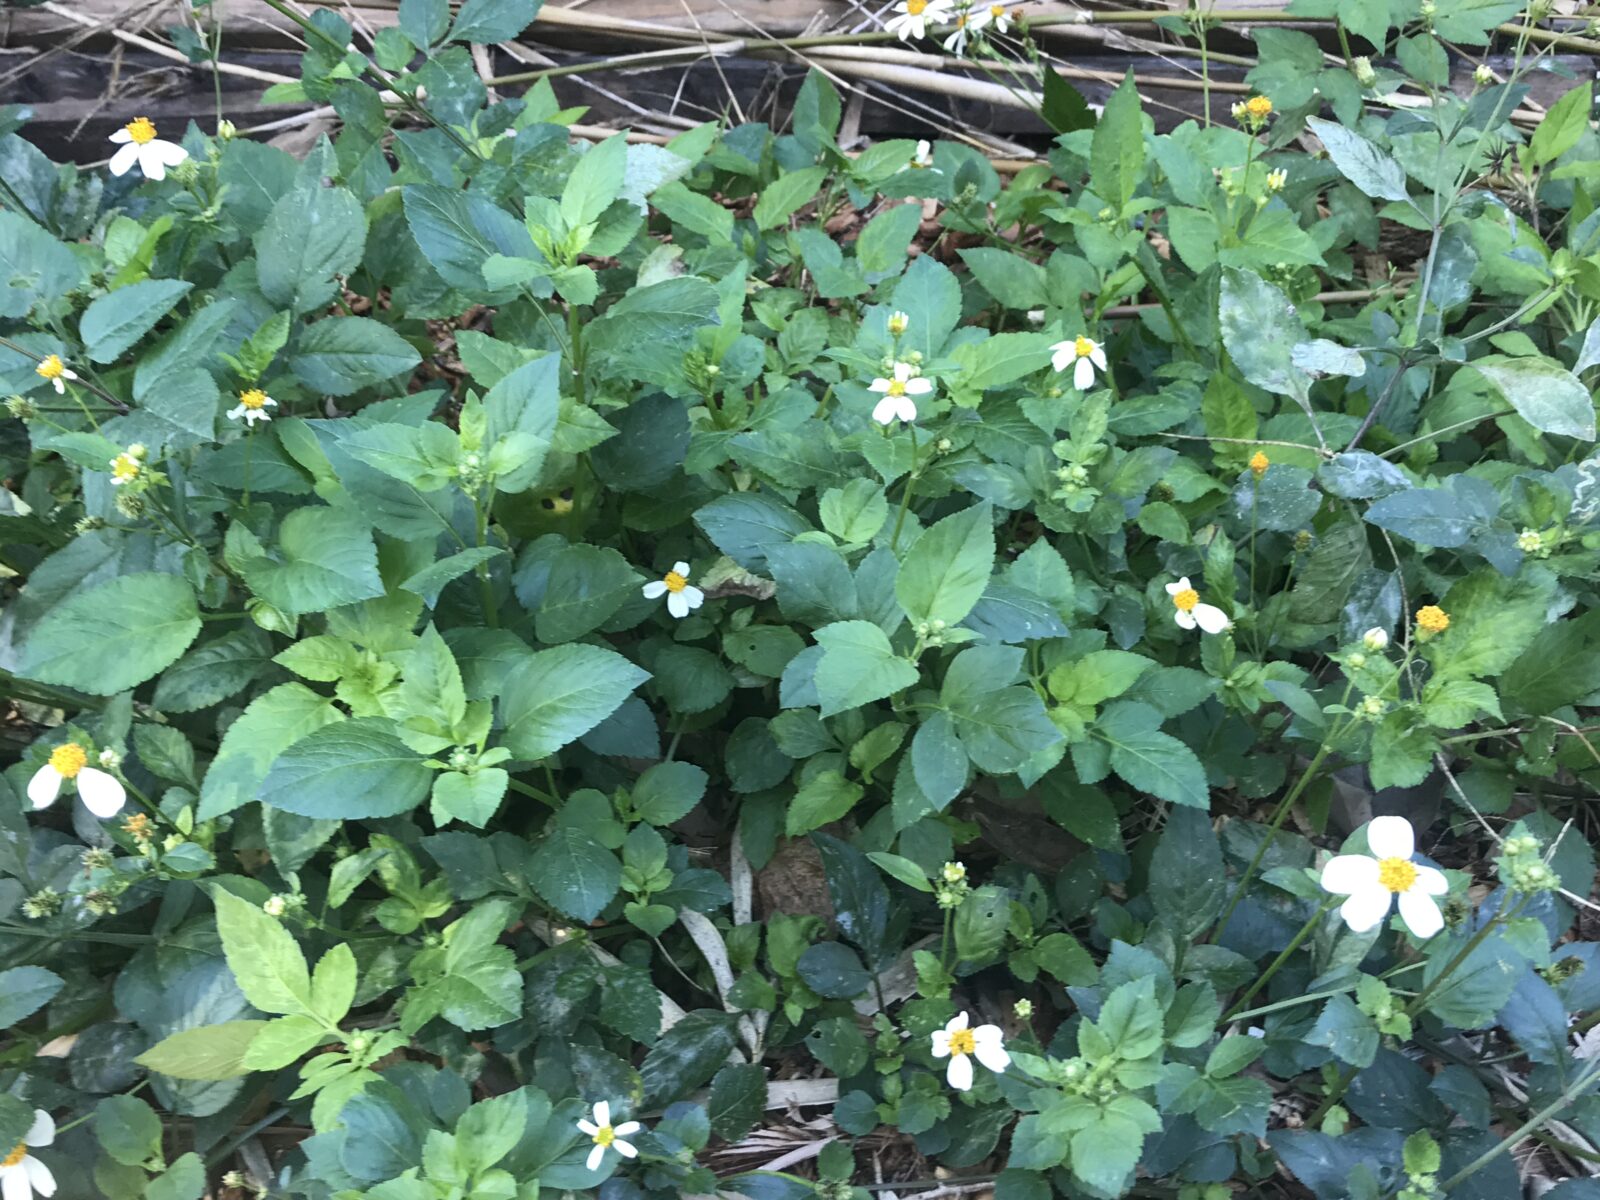 Bidens alba, also called beggerticks and Spanish needles are one of the most prolific of the common Florida weeds for chickens.